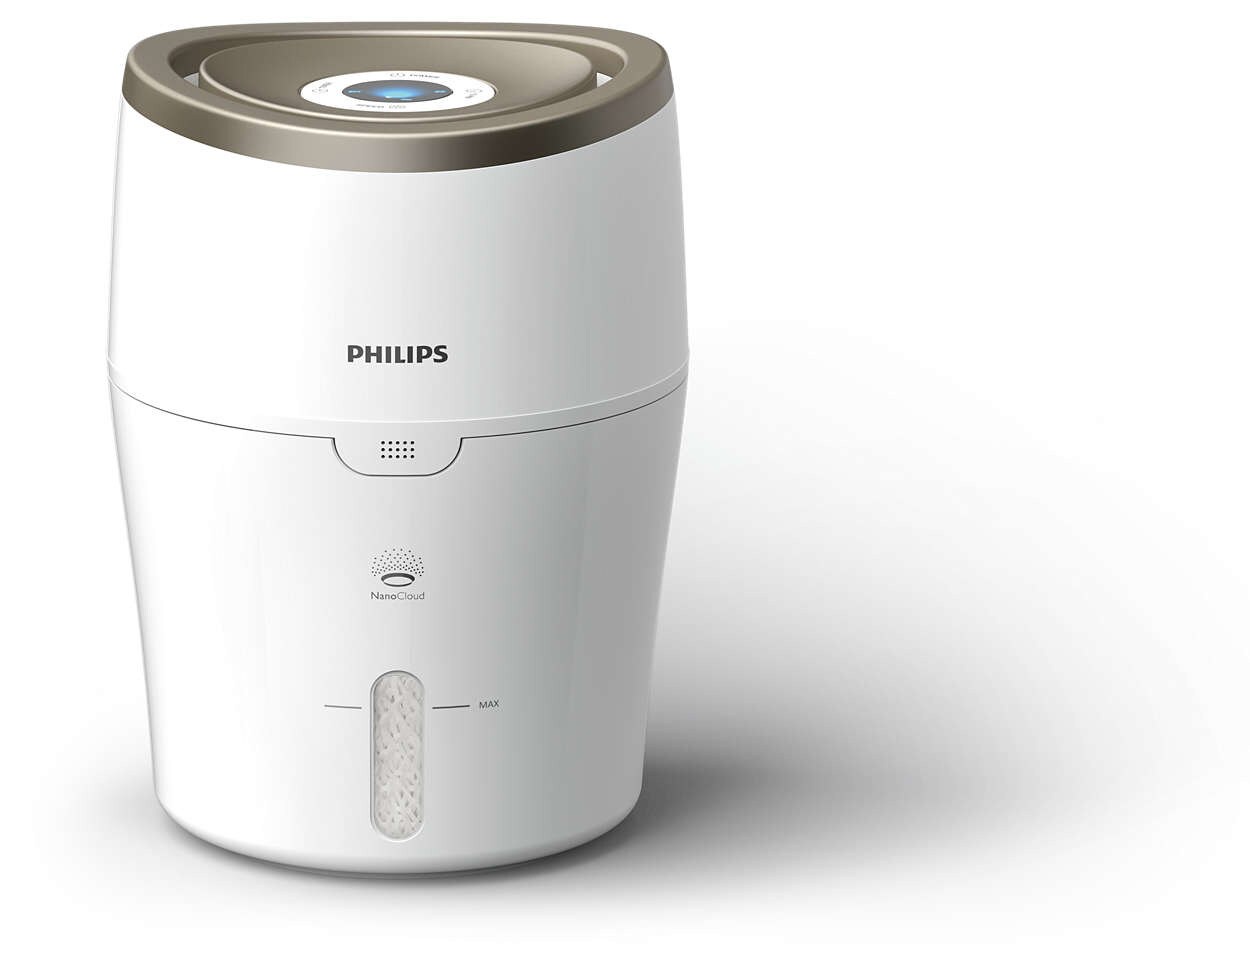 assembly double Confront Philips 2000 0.5-Gallon Tower Evaporative Humidifier (For Rooms 151-400  Square Feet) at Lowes.com